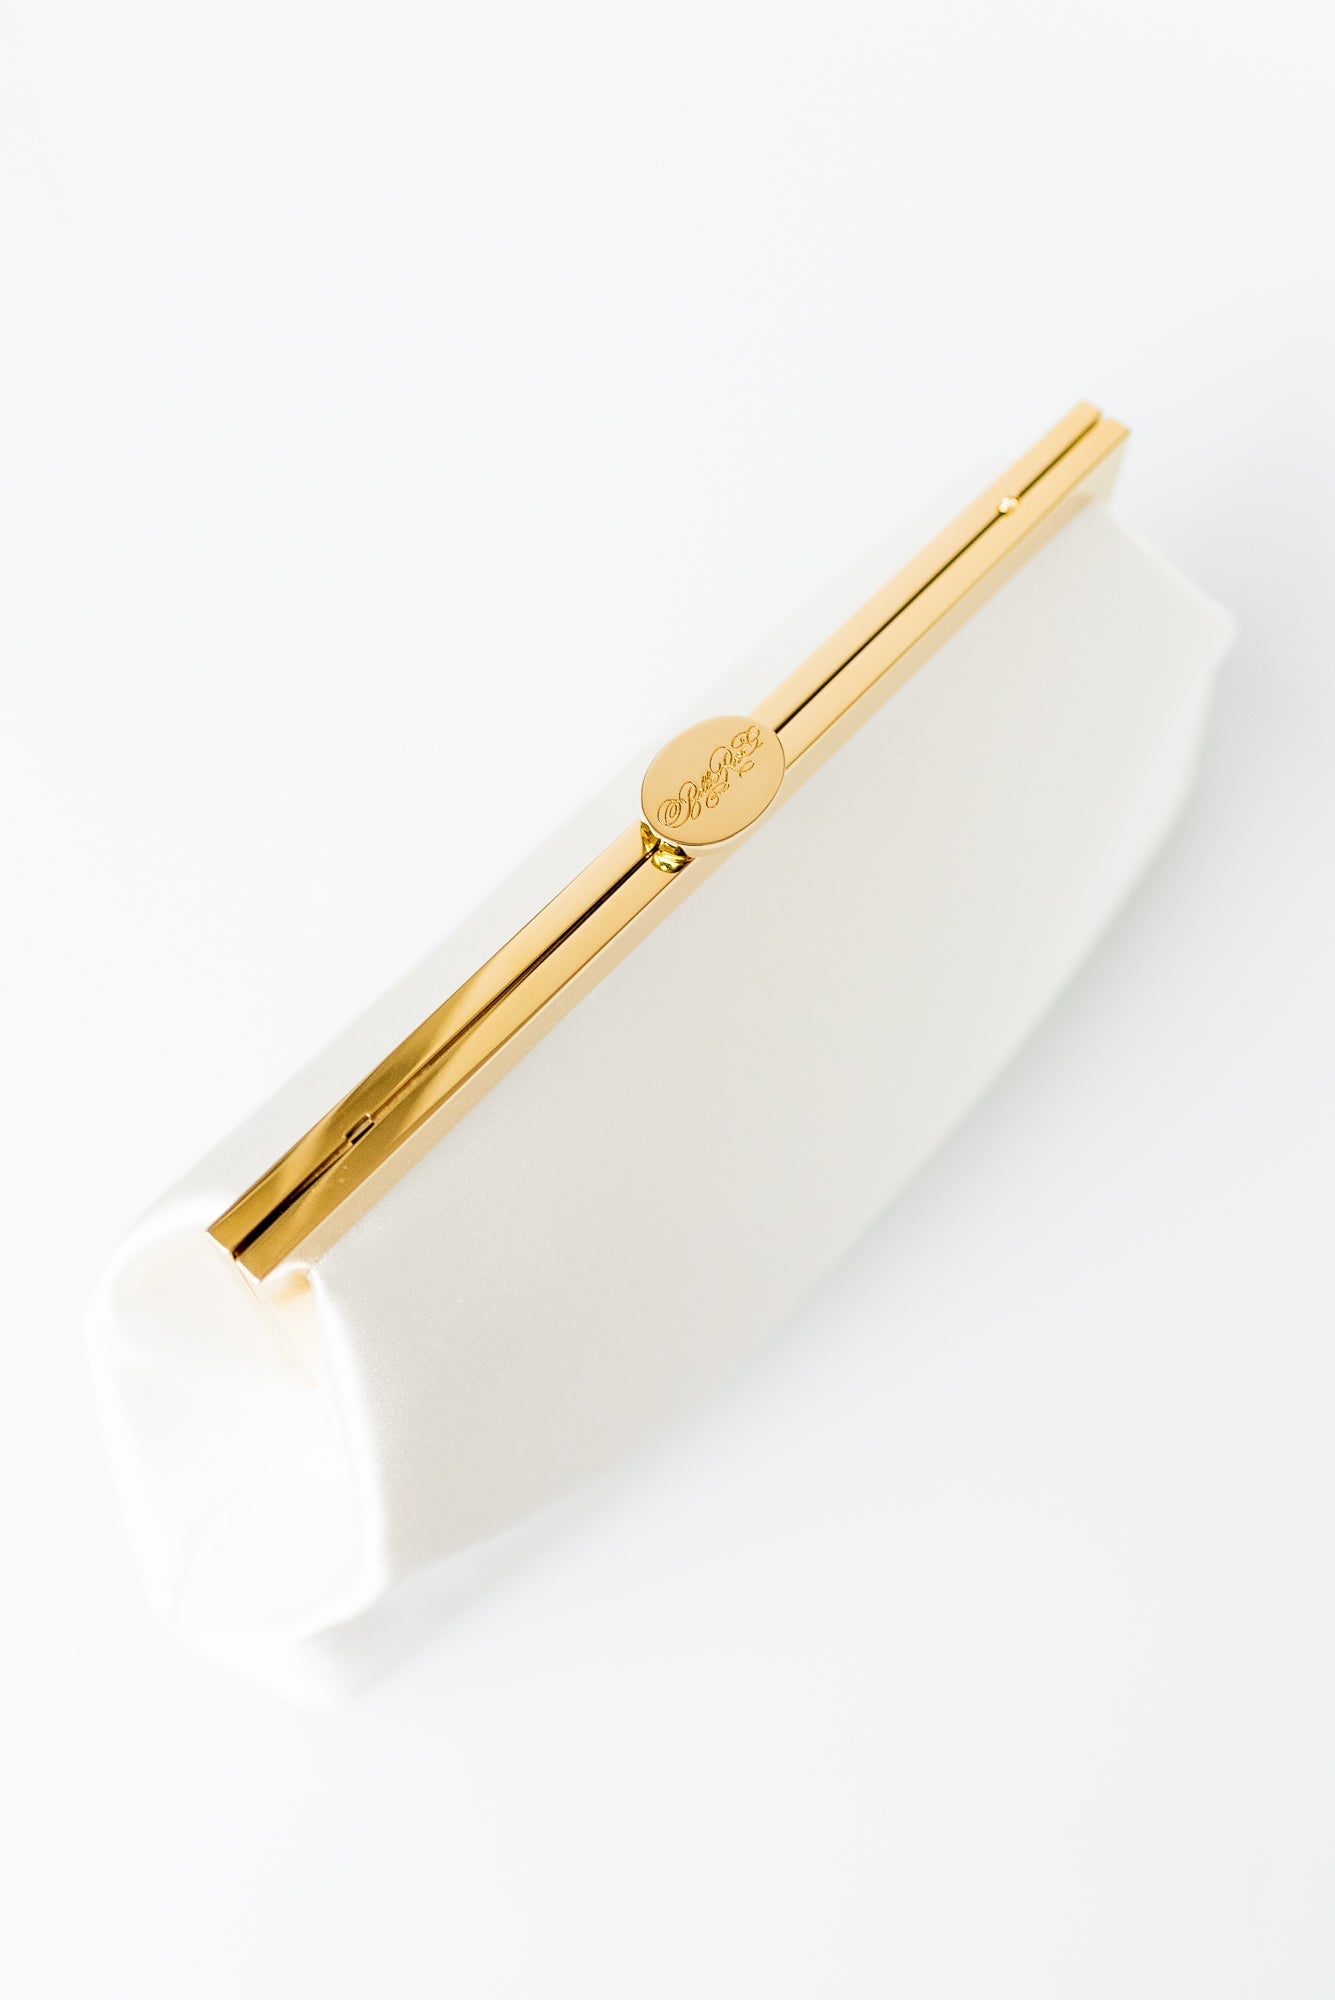 A gold-colored pen placed diagonally across a white The Bella Rosa Collection Rosa Clutch Monogram Embroidery with floral embroidery.